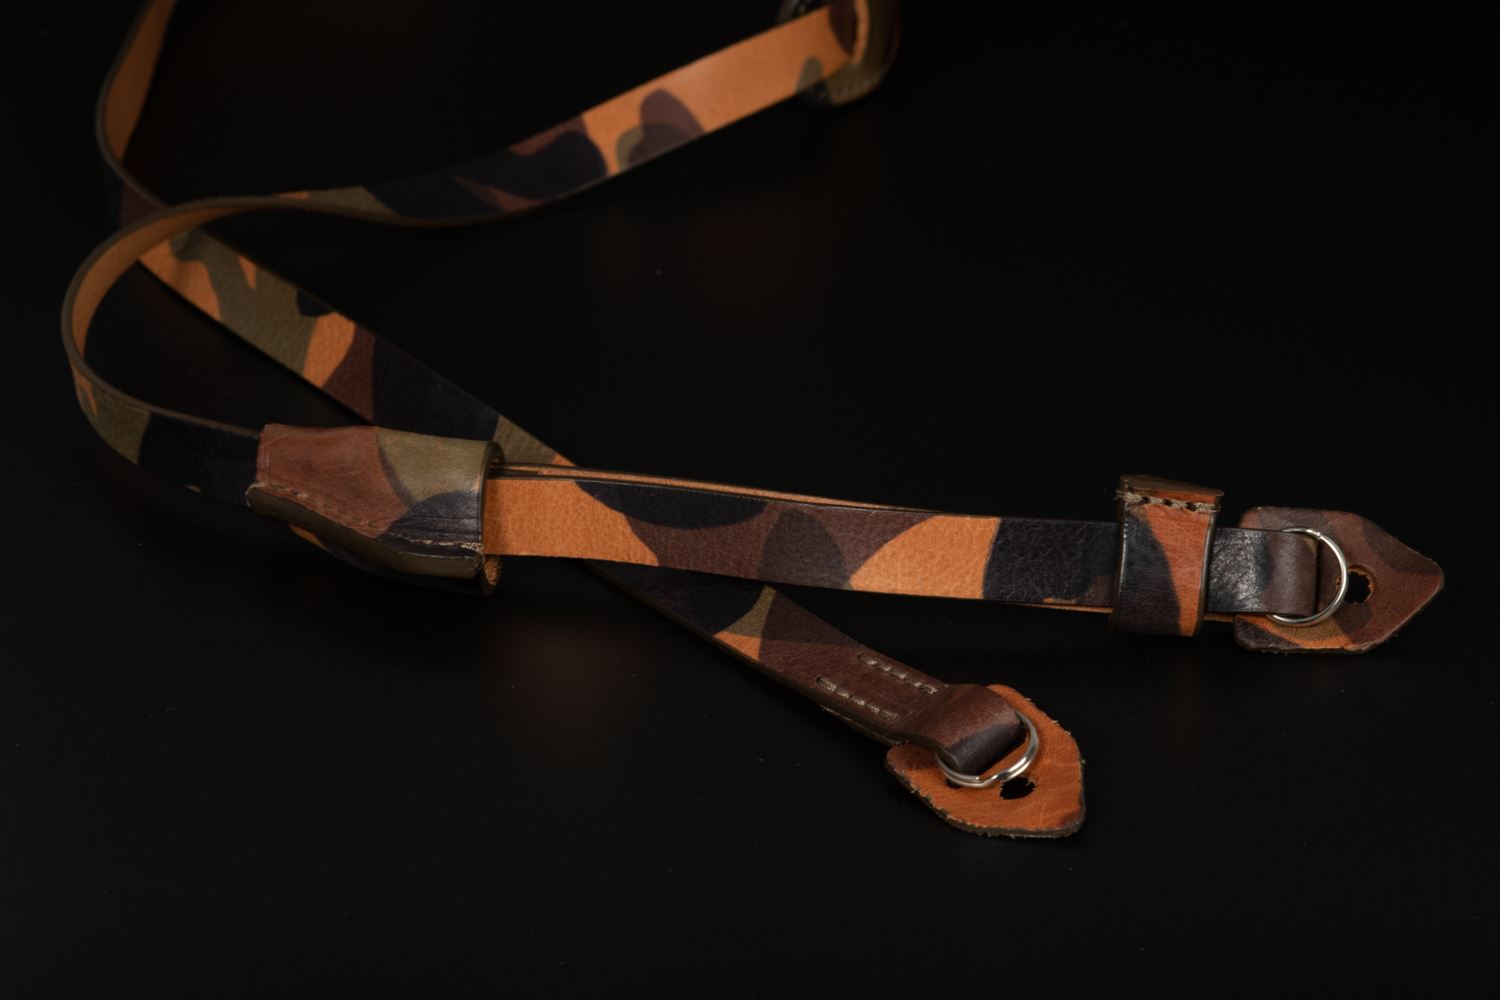 Picture of Angelo Pelle Neck Strap, Padded - Camouflage Pad and Belt